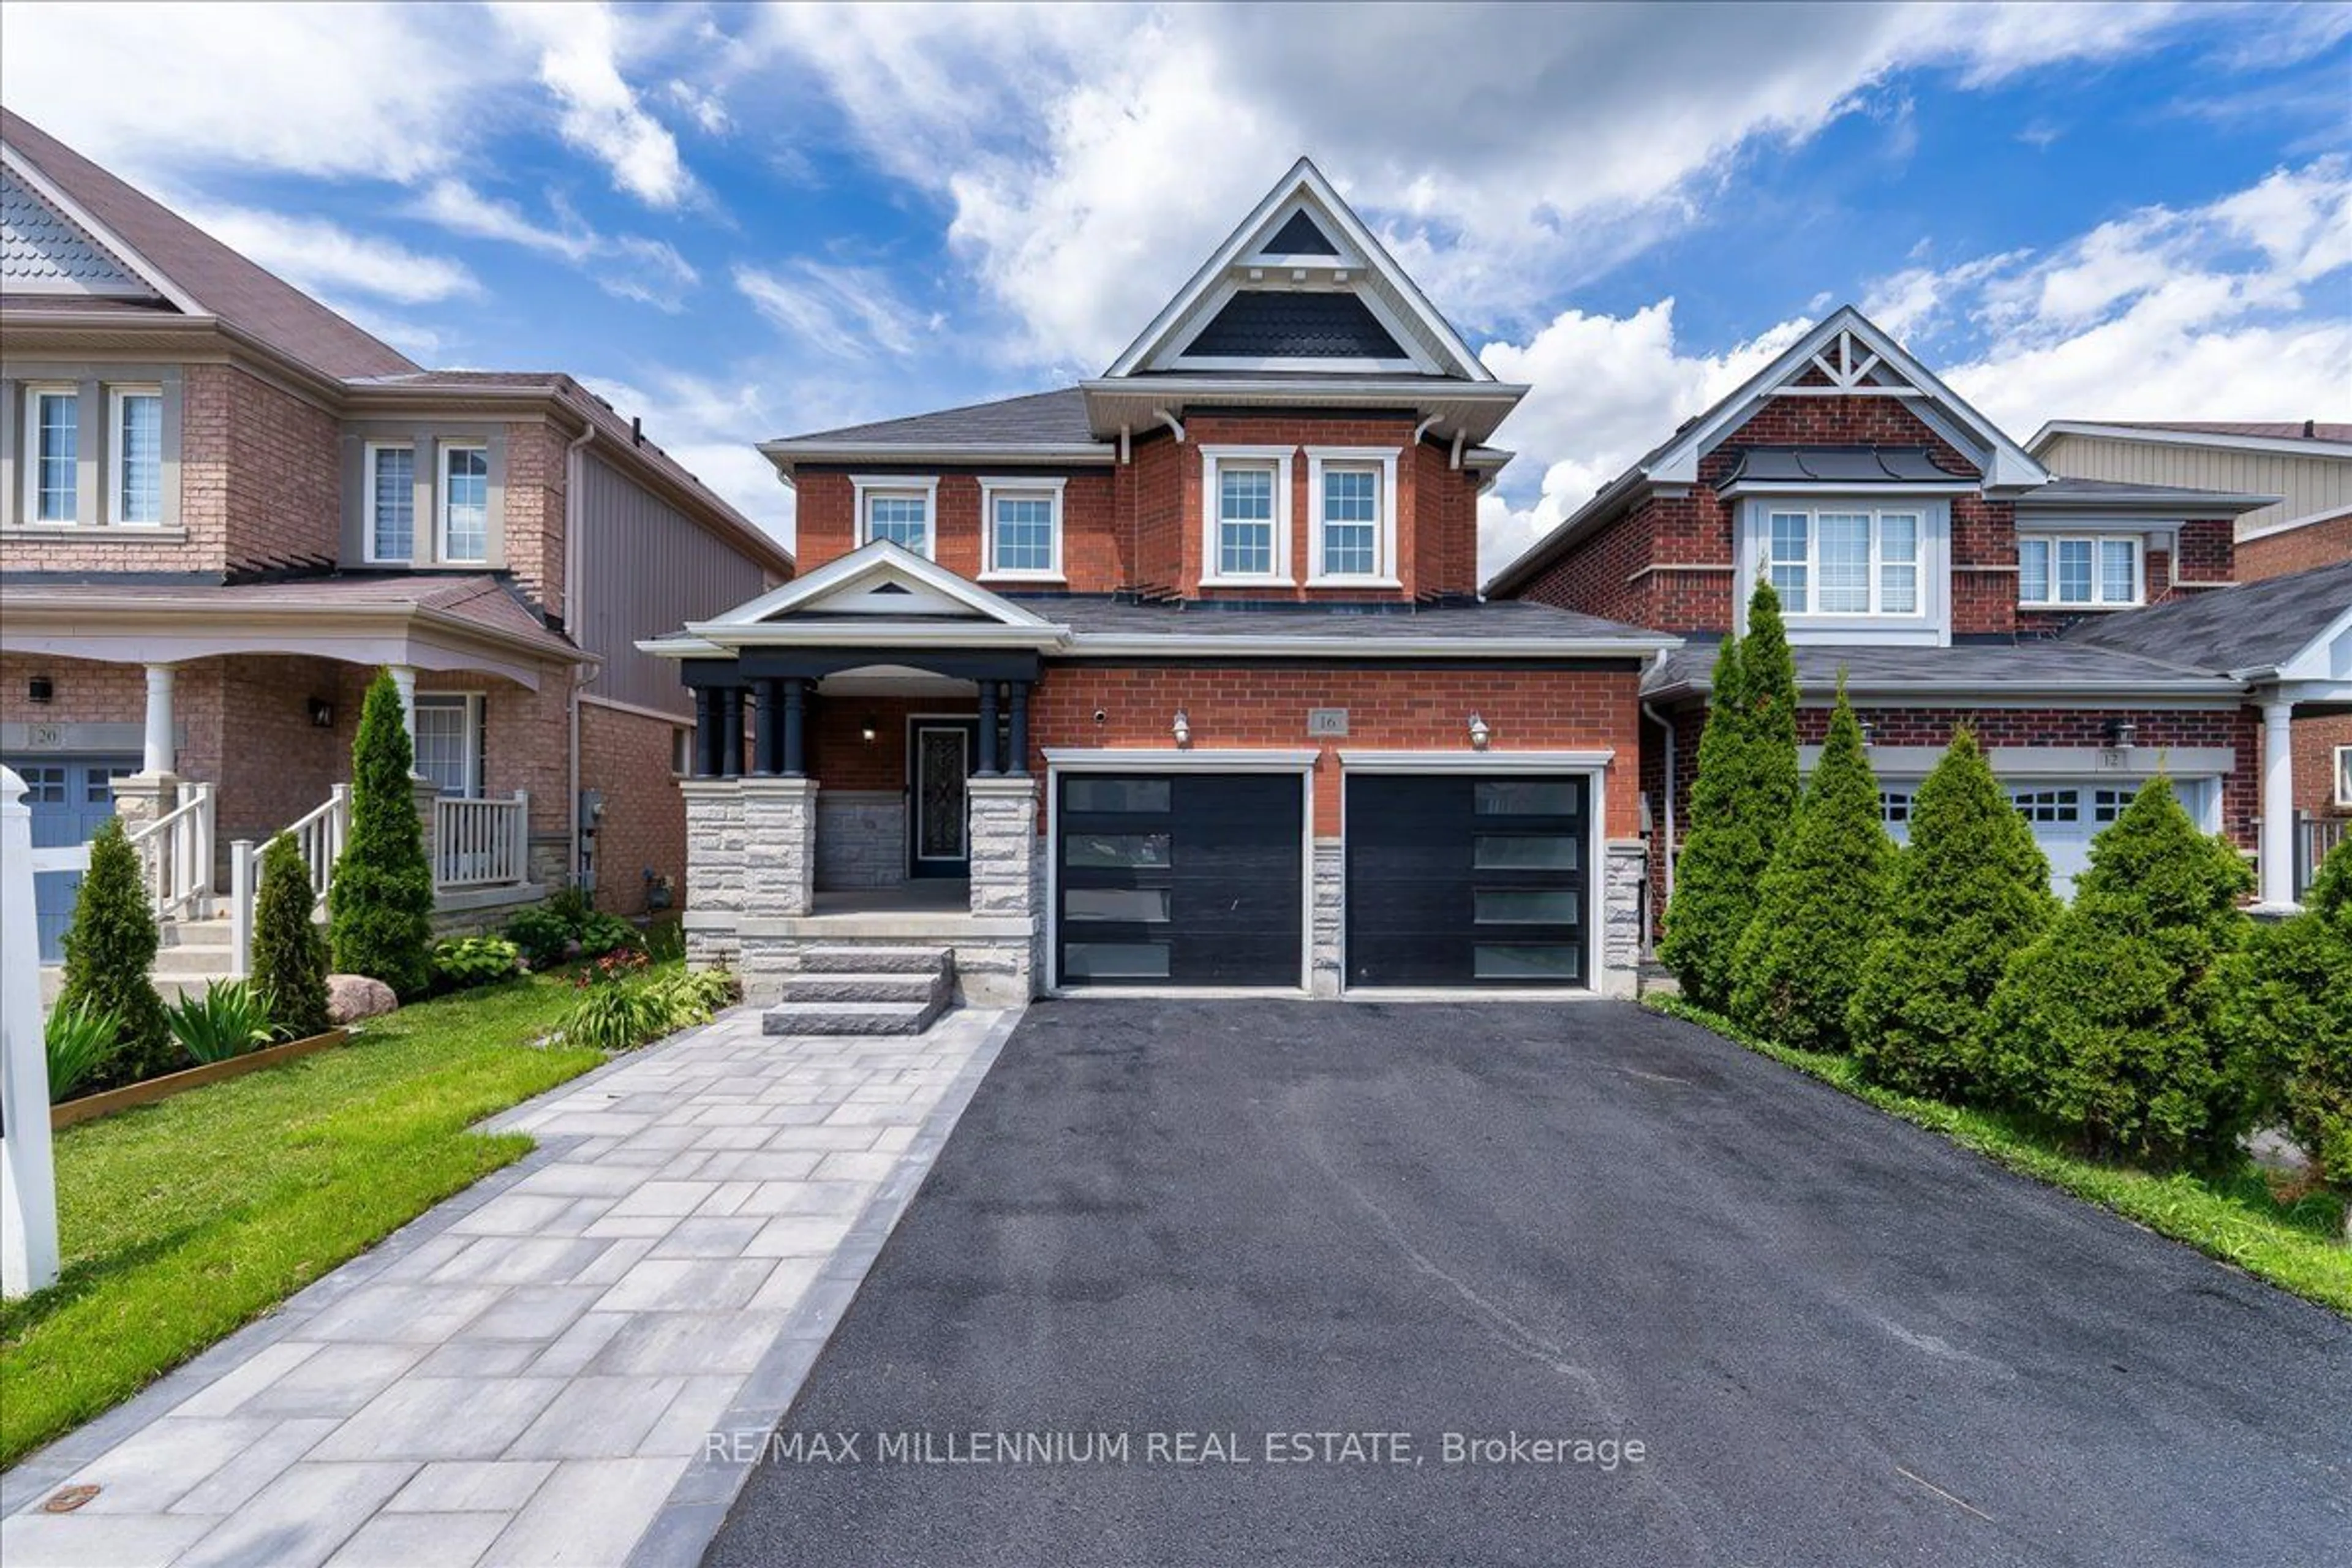 Home with brick exterior material for 16 Acorn Lane, Bradford West Gwillimbury Ontario L3Z 0H6